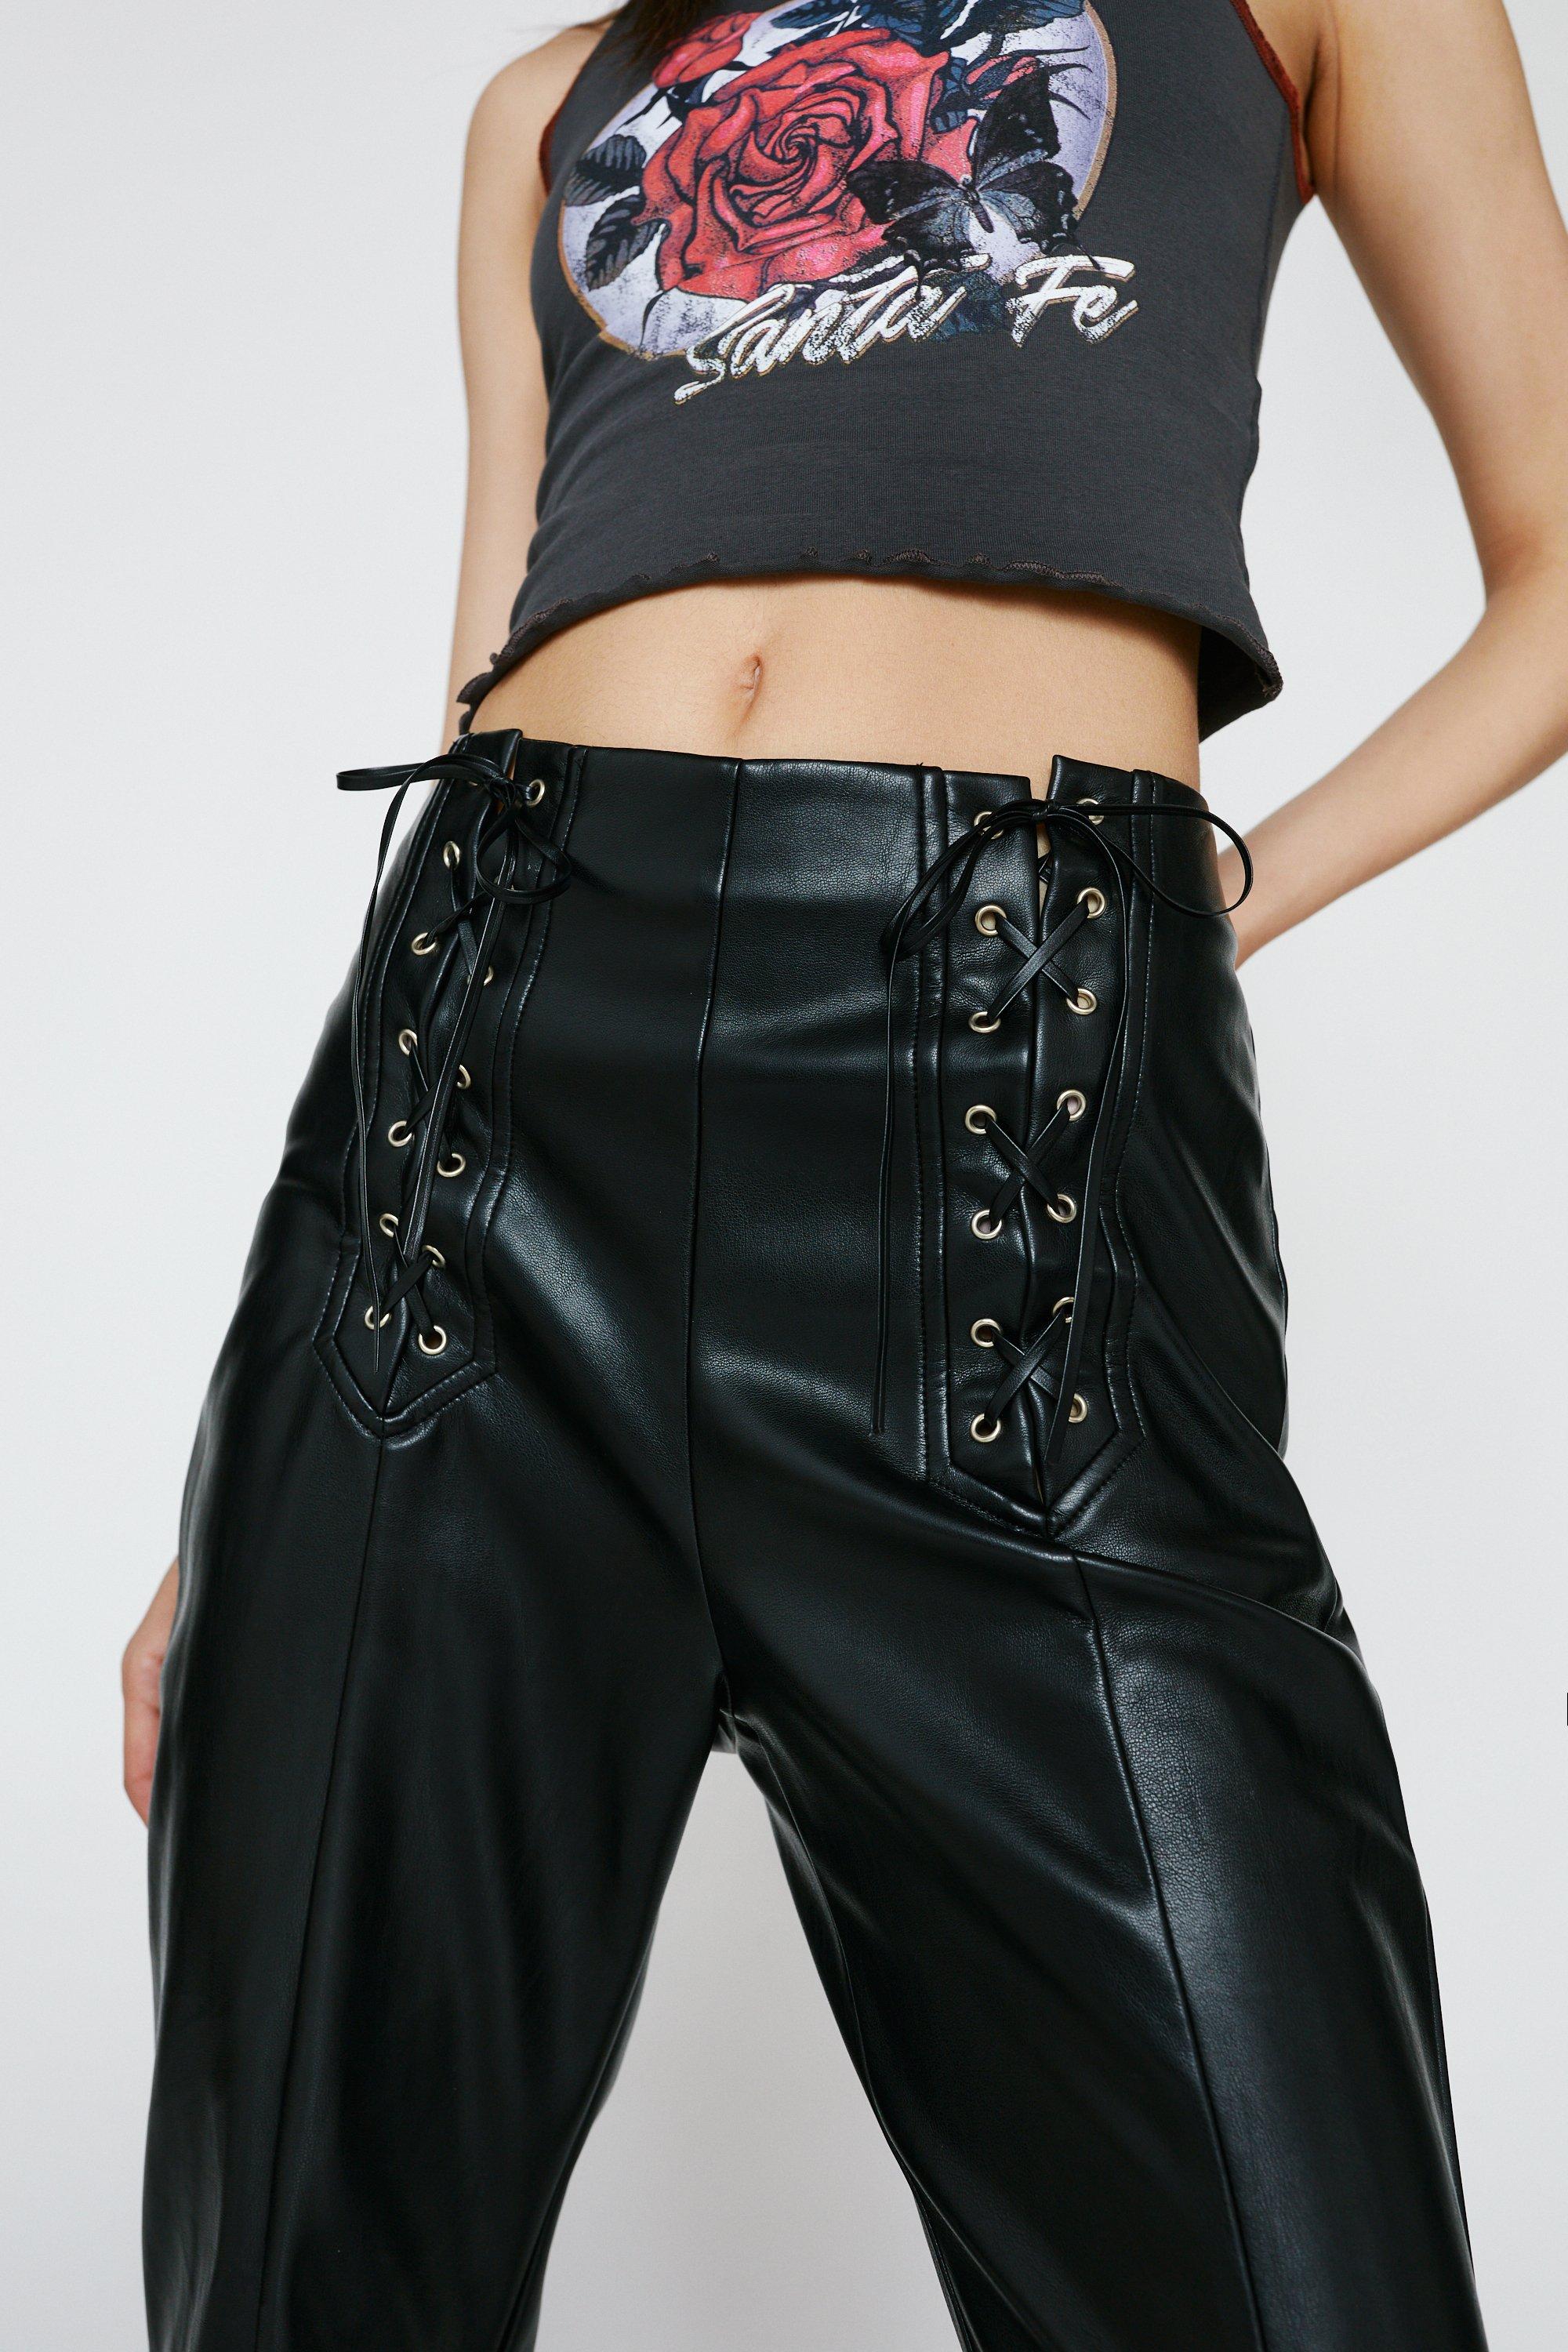 Lace Up Leather Pants - Lace Up Leather Leggings